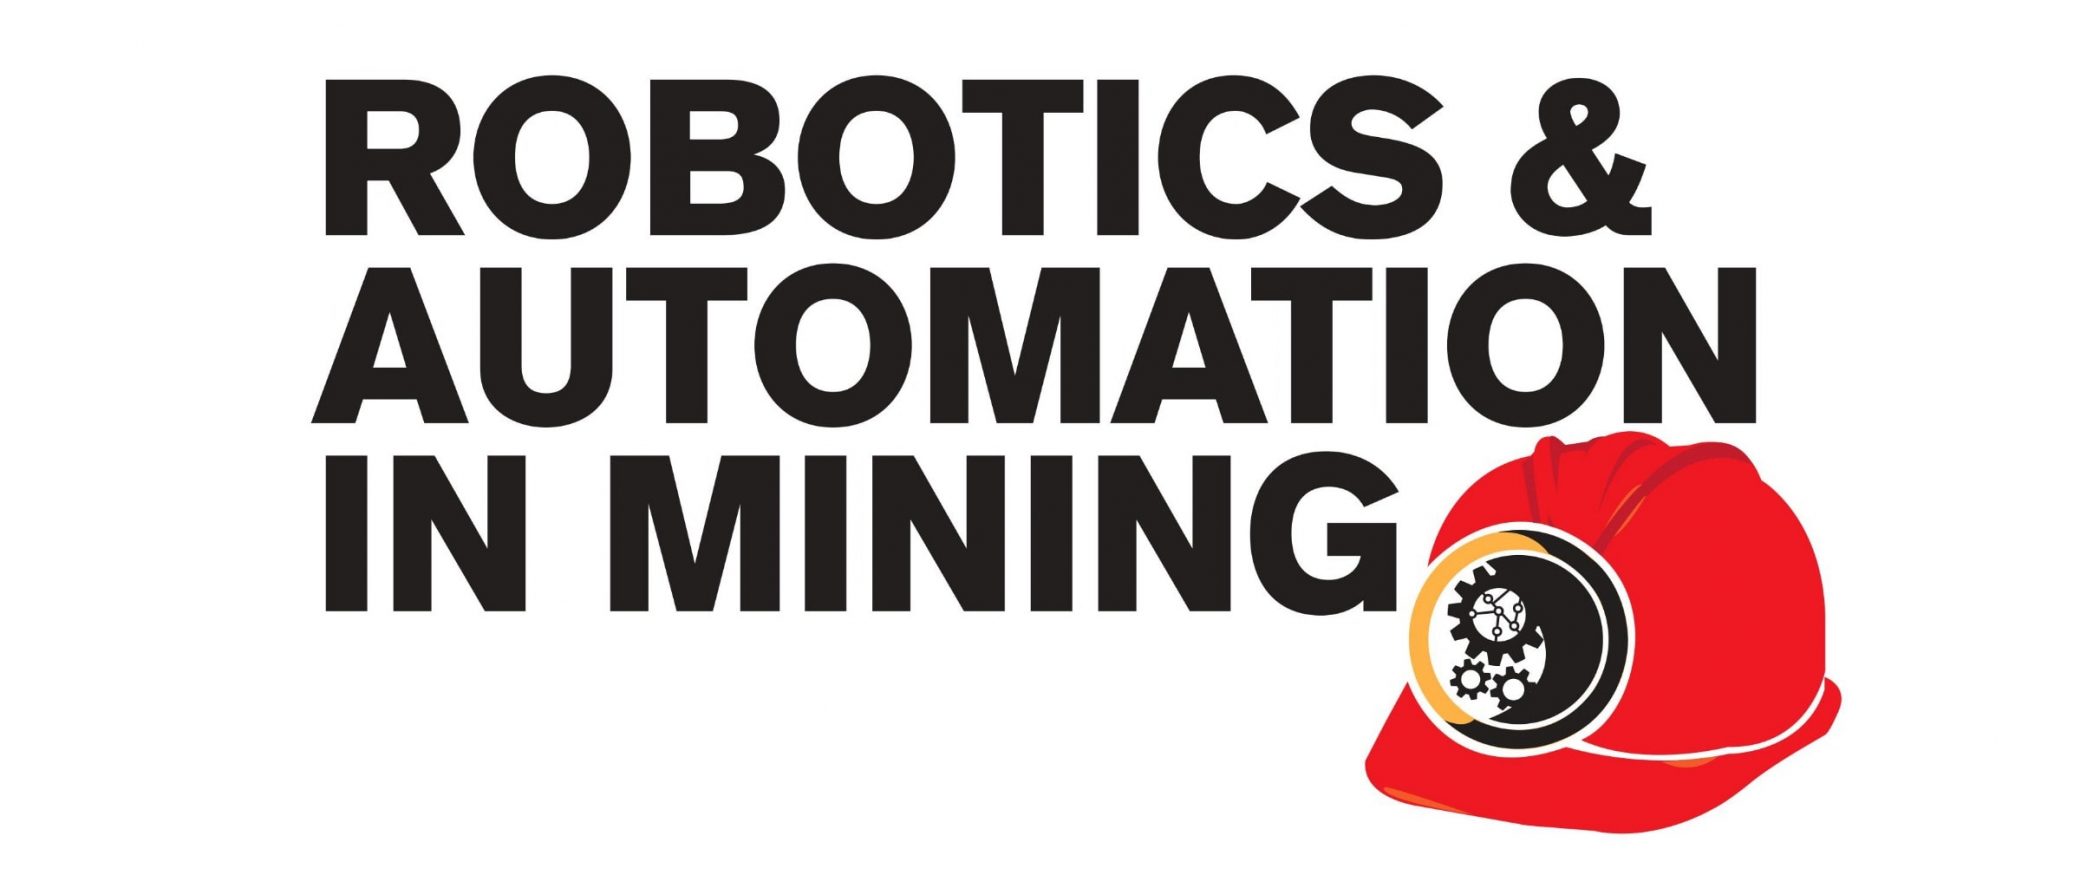 Robotics and Automation in mining conference